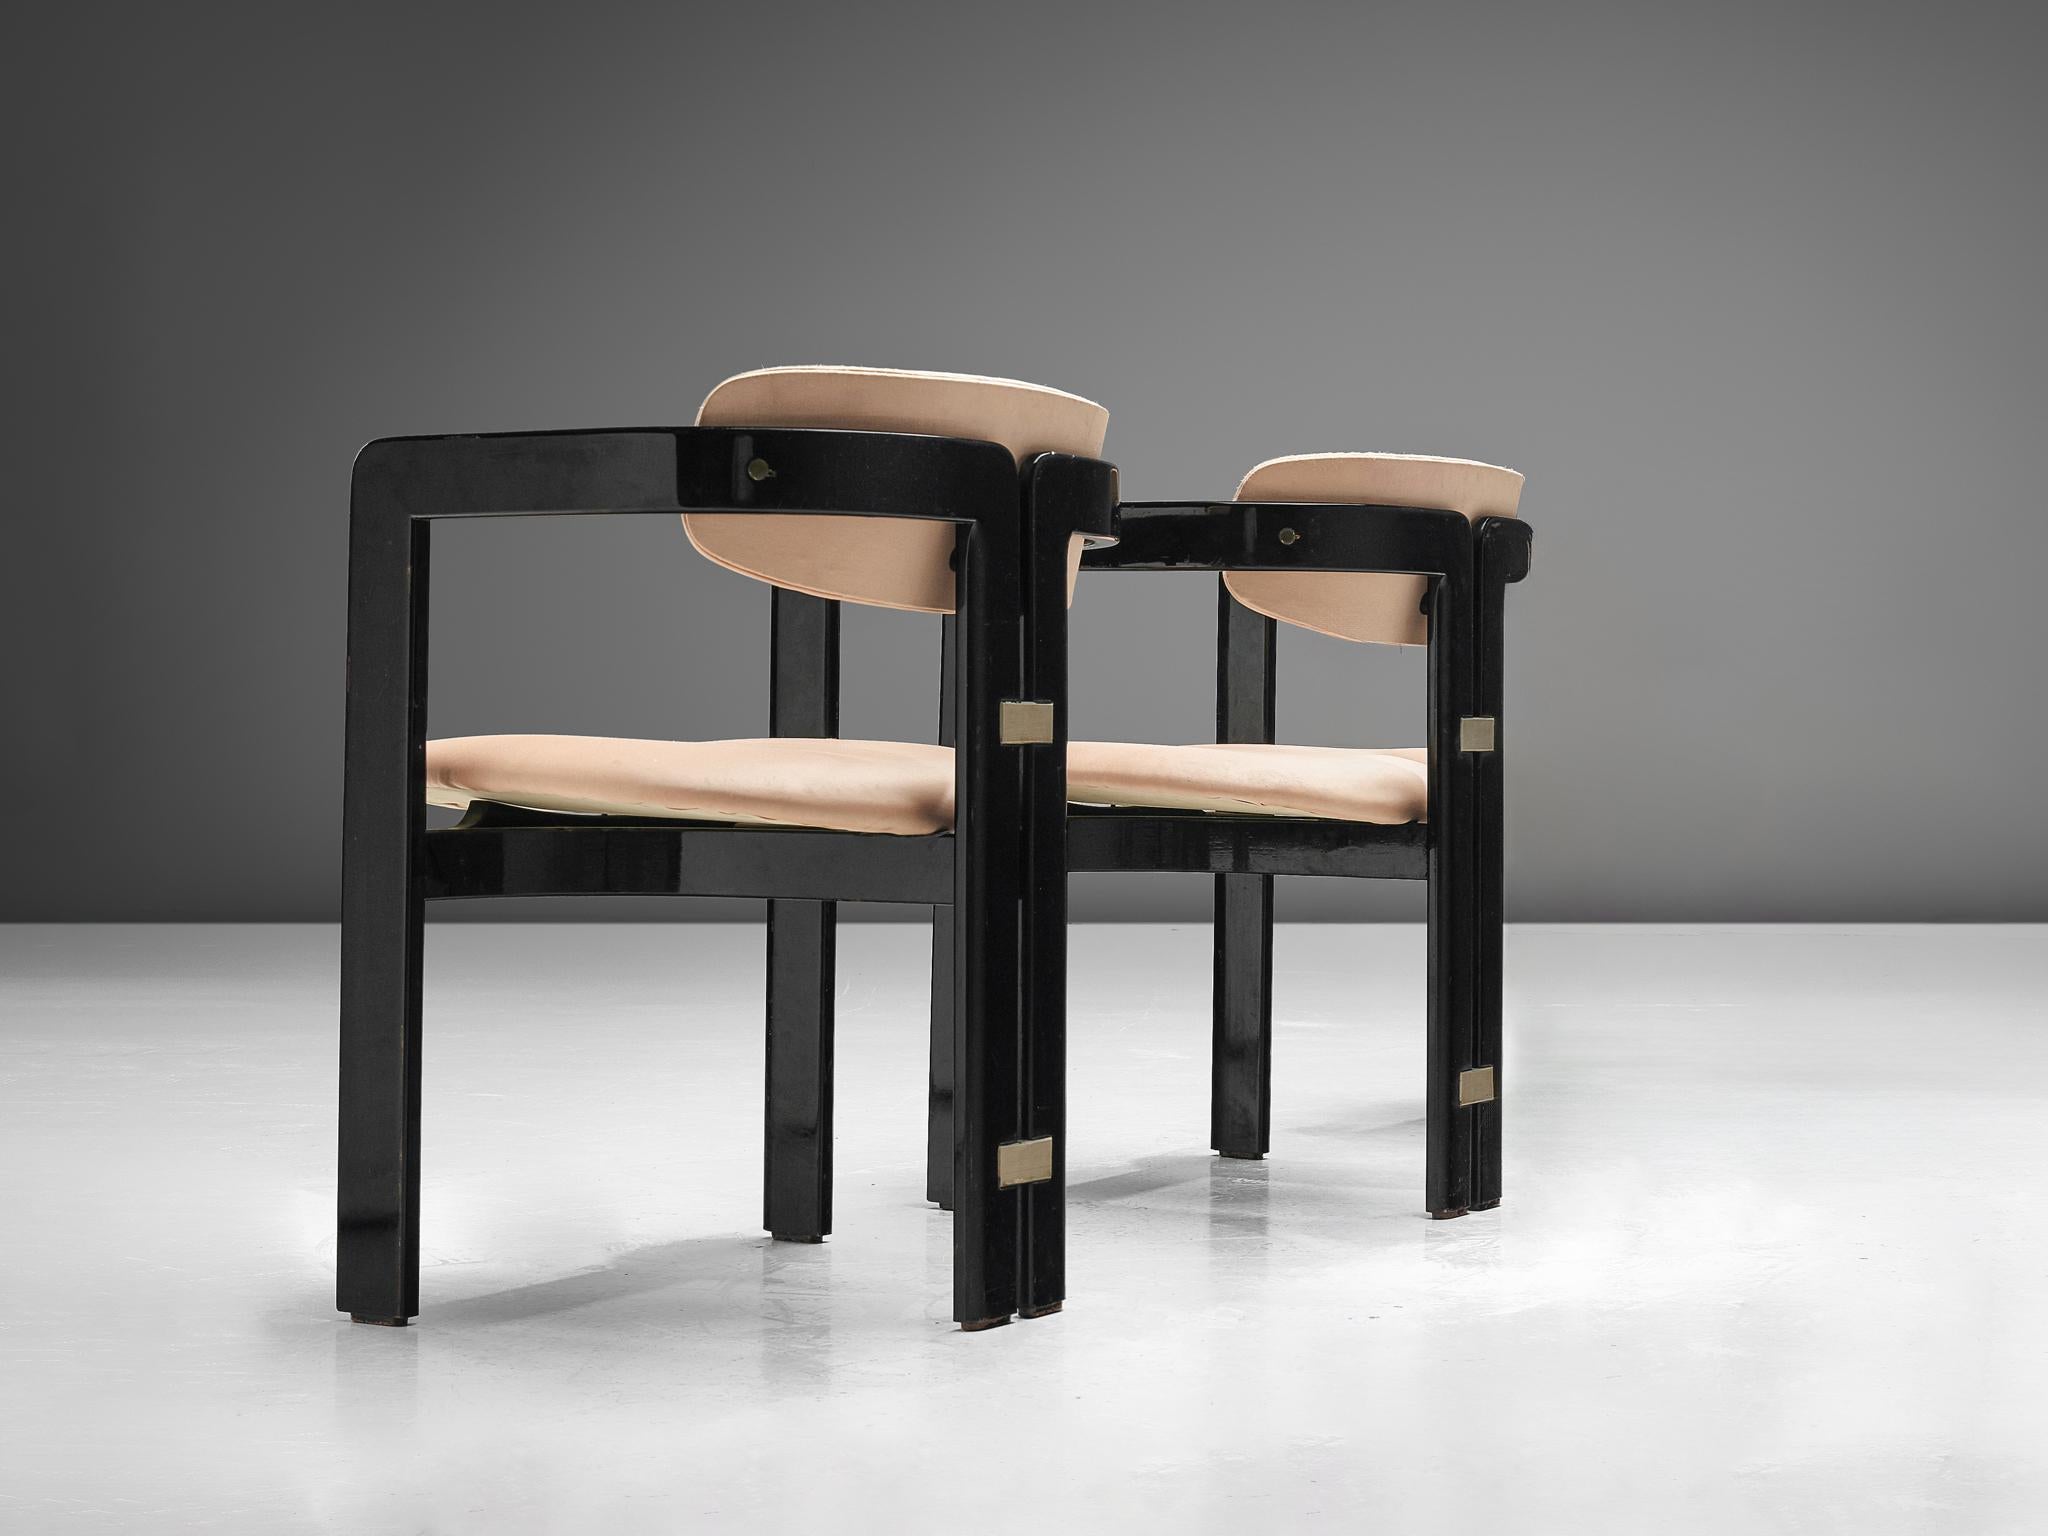 Augusto Savini for Pozzi, pair of 'Pamplona' dining room chairs , ebonized ashwood, pink fabric, Italy, design 1965

Iconic 'Pamplona' armchairs in black lacquered ash and soft pink upholstery. A characteristic design by Augusto Savini; simplistic